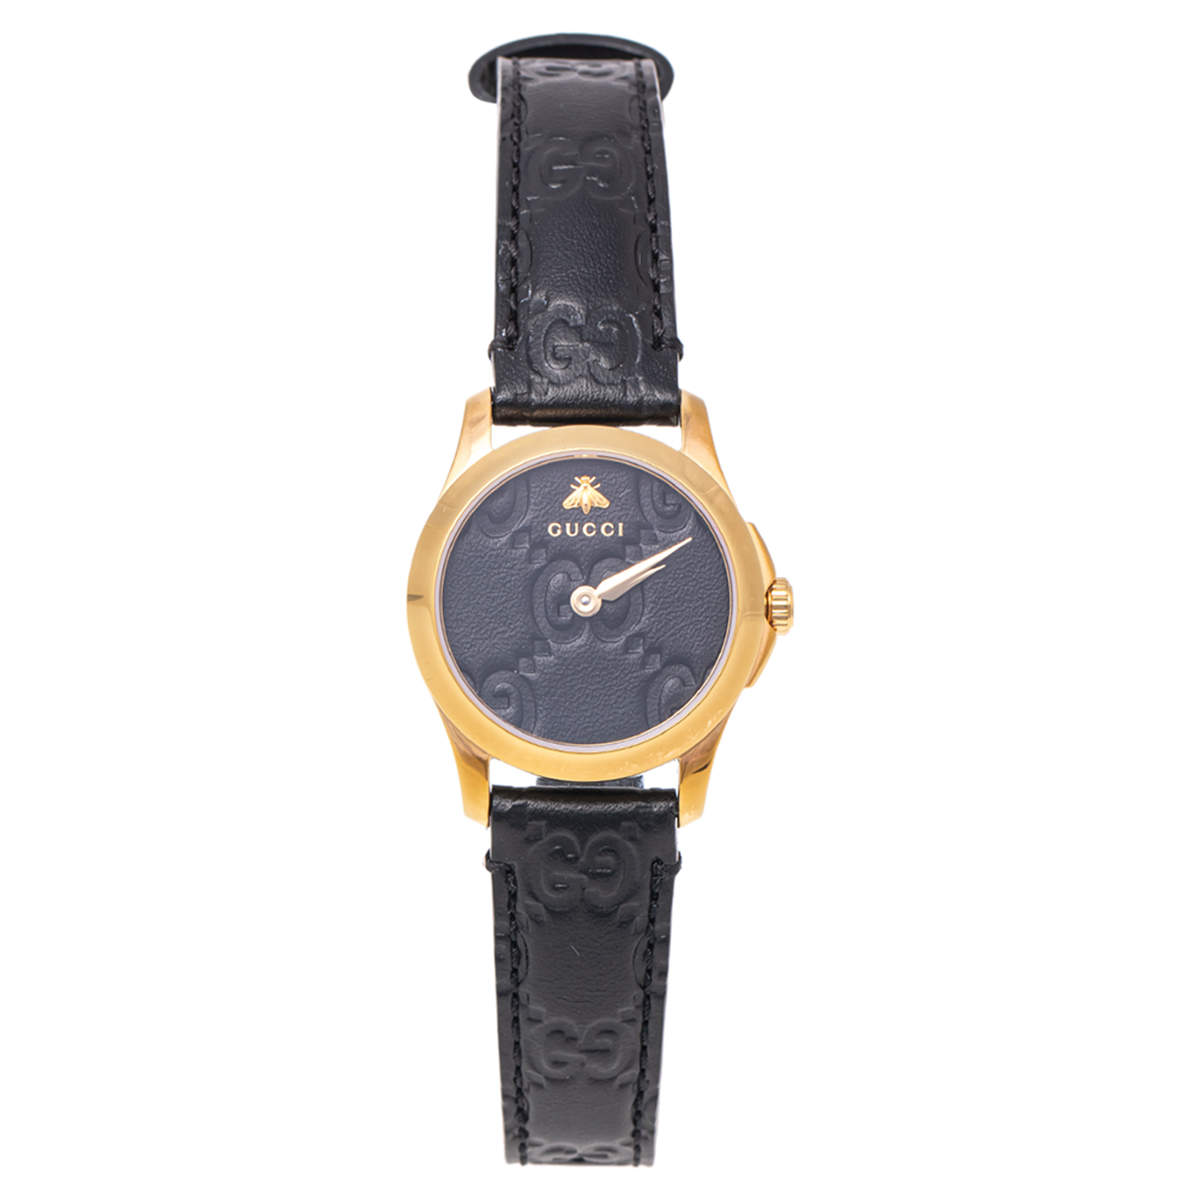 Gucci Black Gold Plated Stainless Steel Leather G-Timeless 126.5 Women's Wristwatch 27 mm